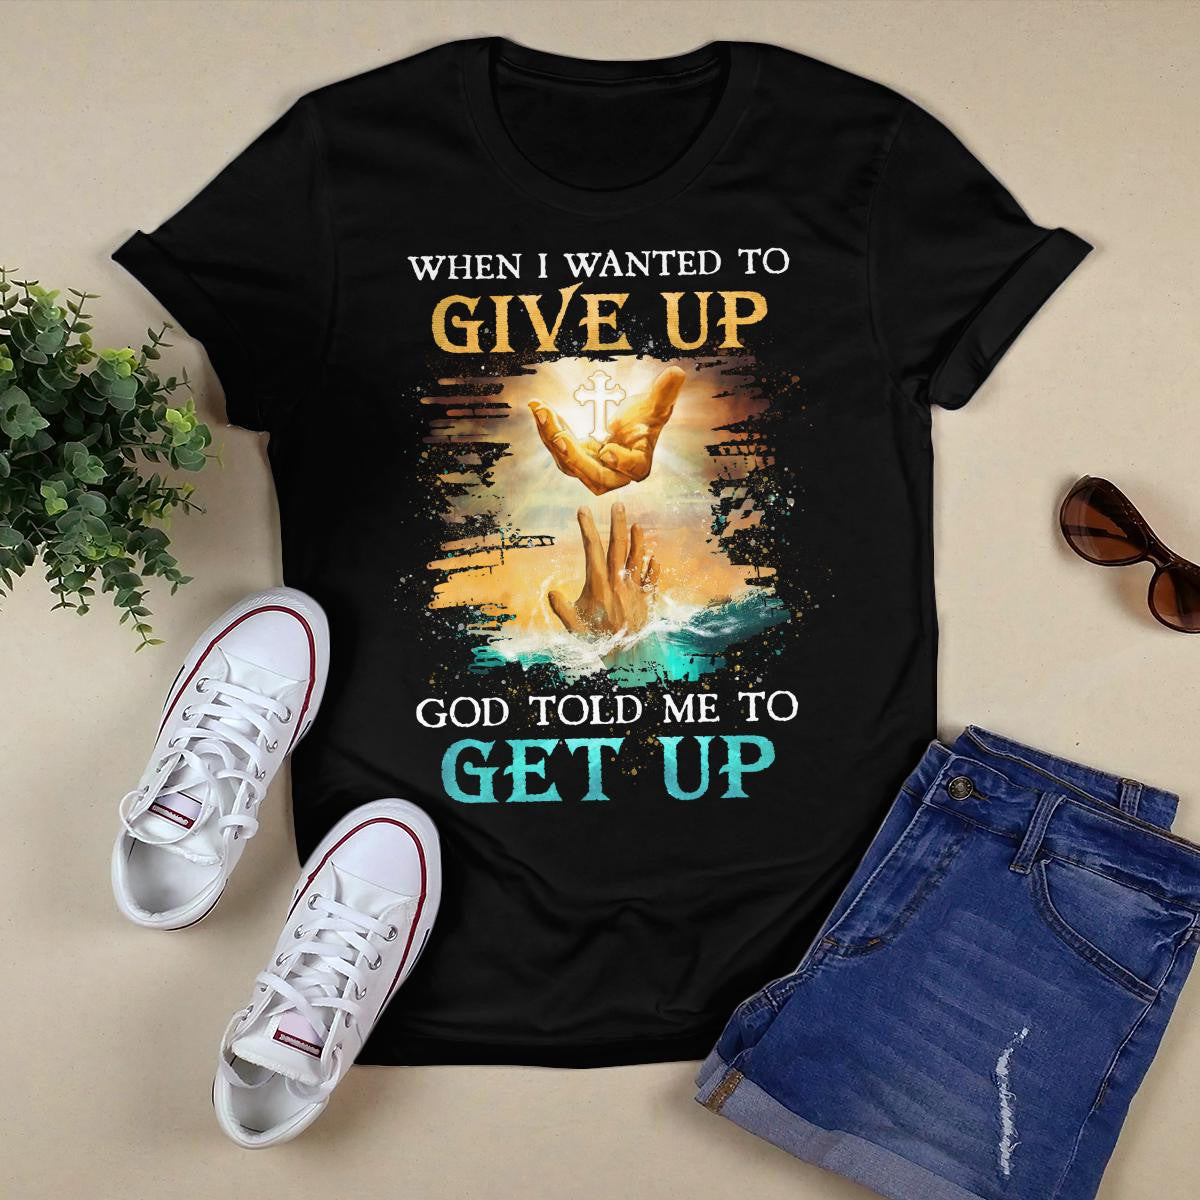 When I Wanted To Give Up God Told Me To Get Up, Saving Hand Of God, God T-Shirt, Jesus Sweatshirt Hoodie, Faith T-Shirt